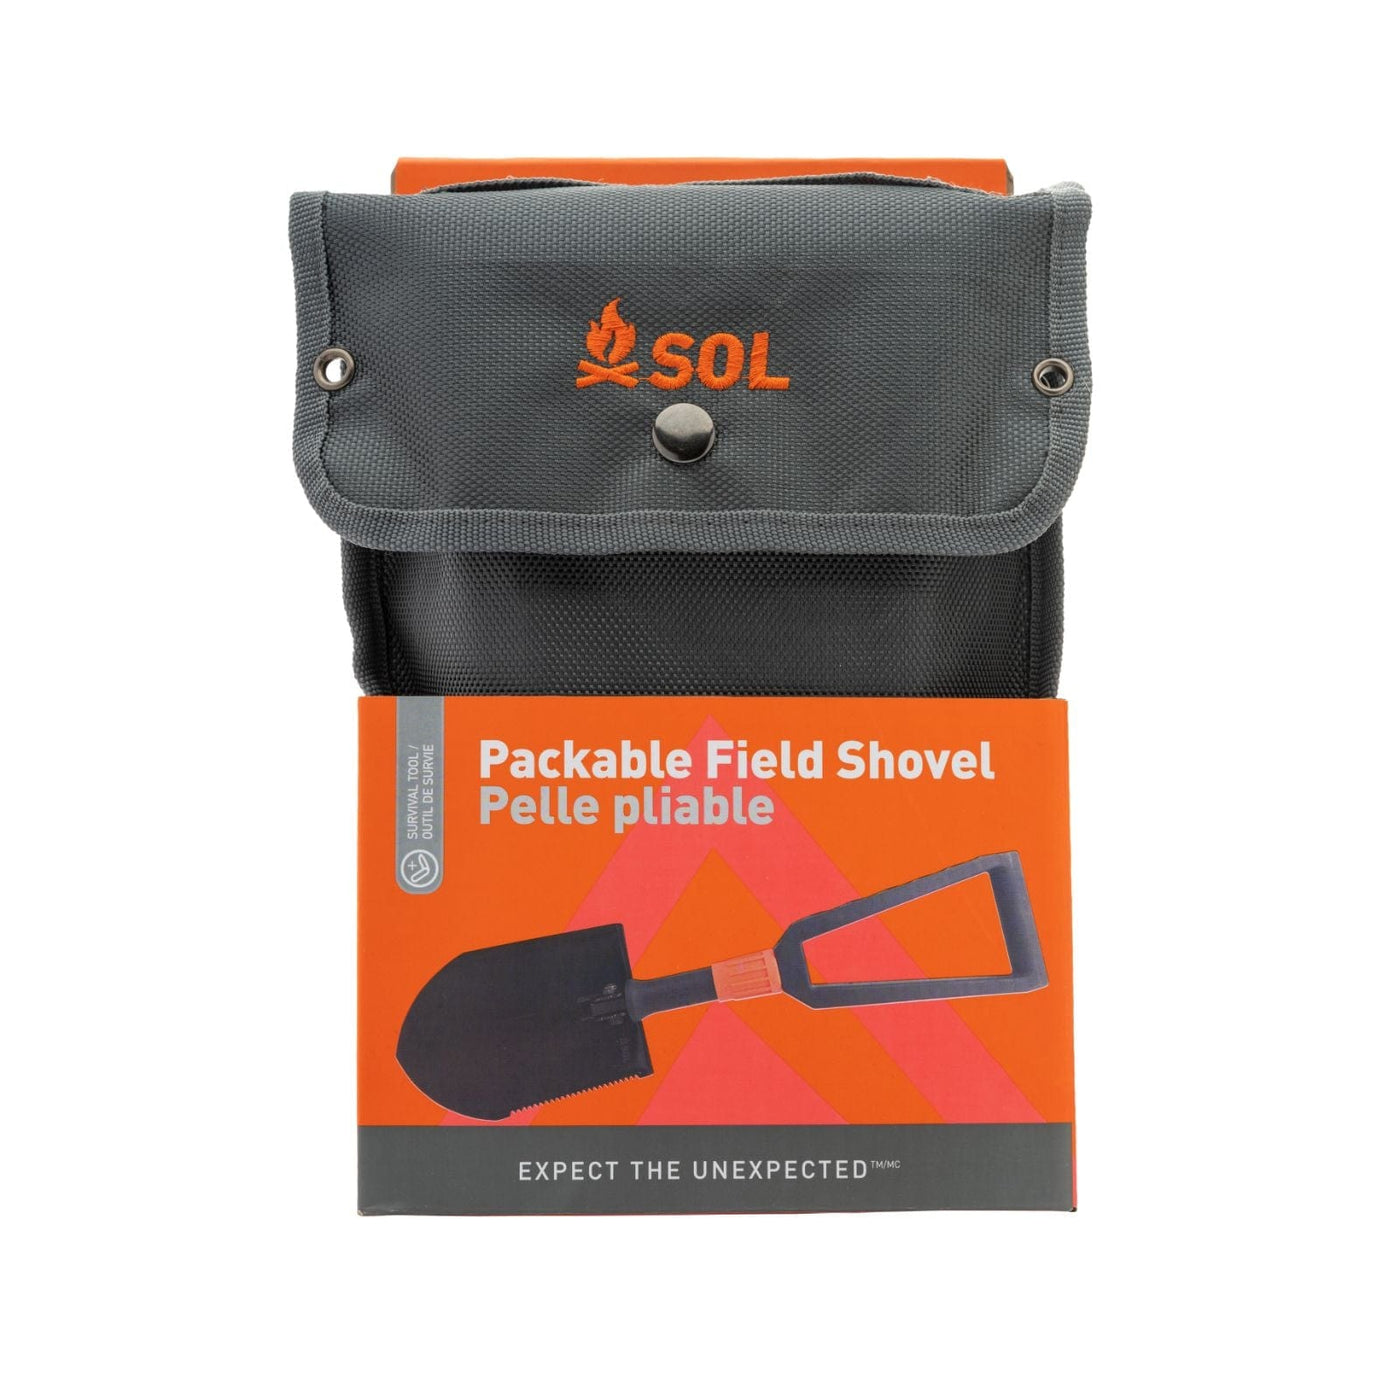 SOL SOL Packable Field Shovel Camping And Outdoor